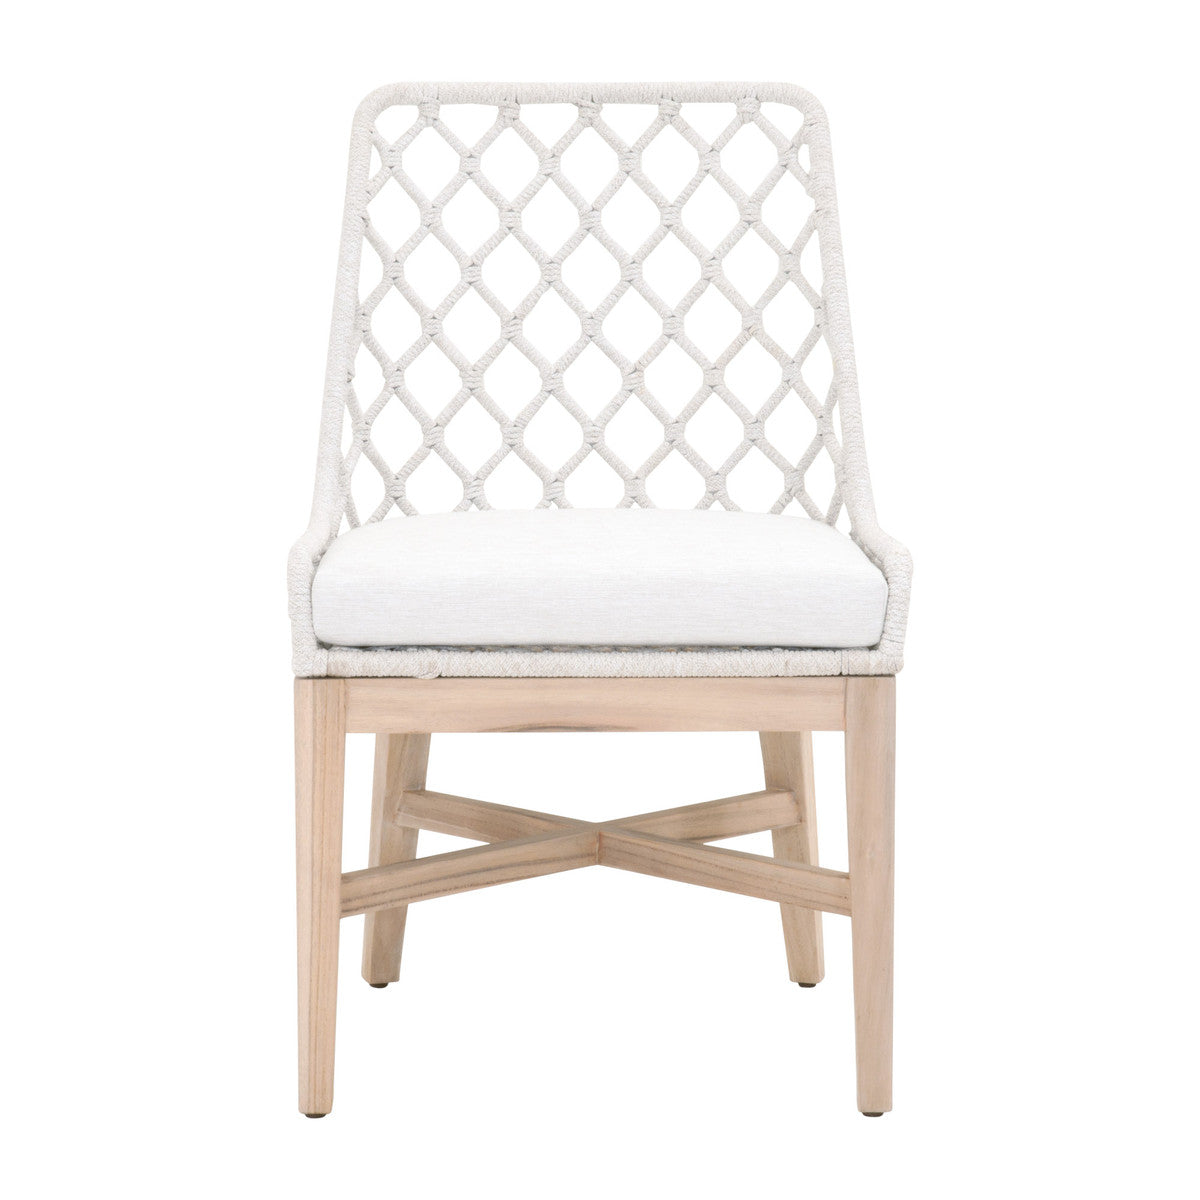 Rope Work Outdoor Dining Chair